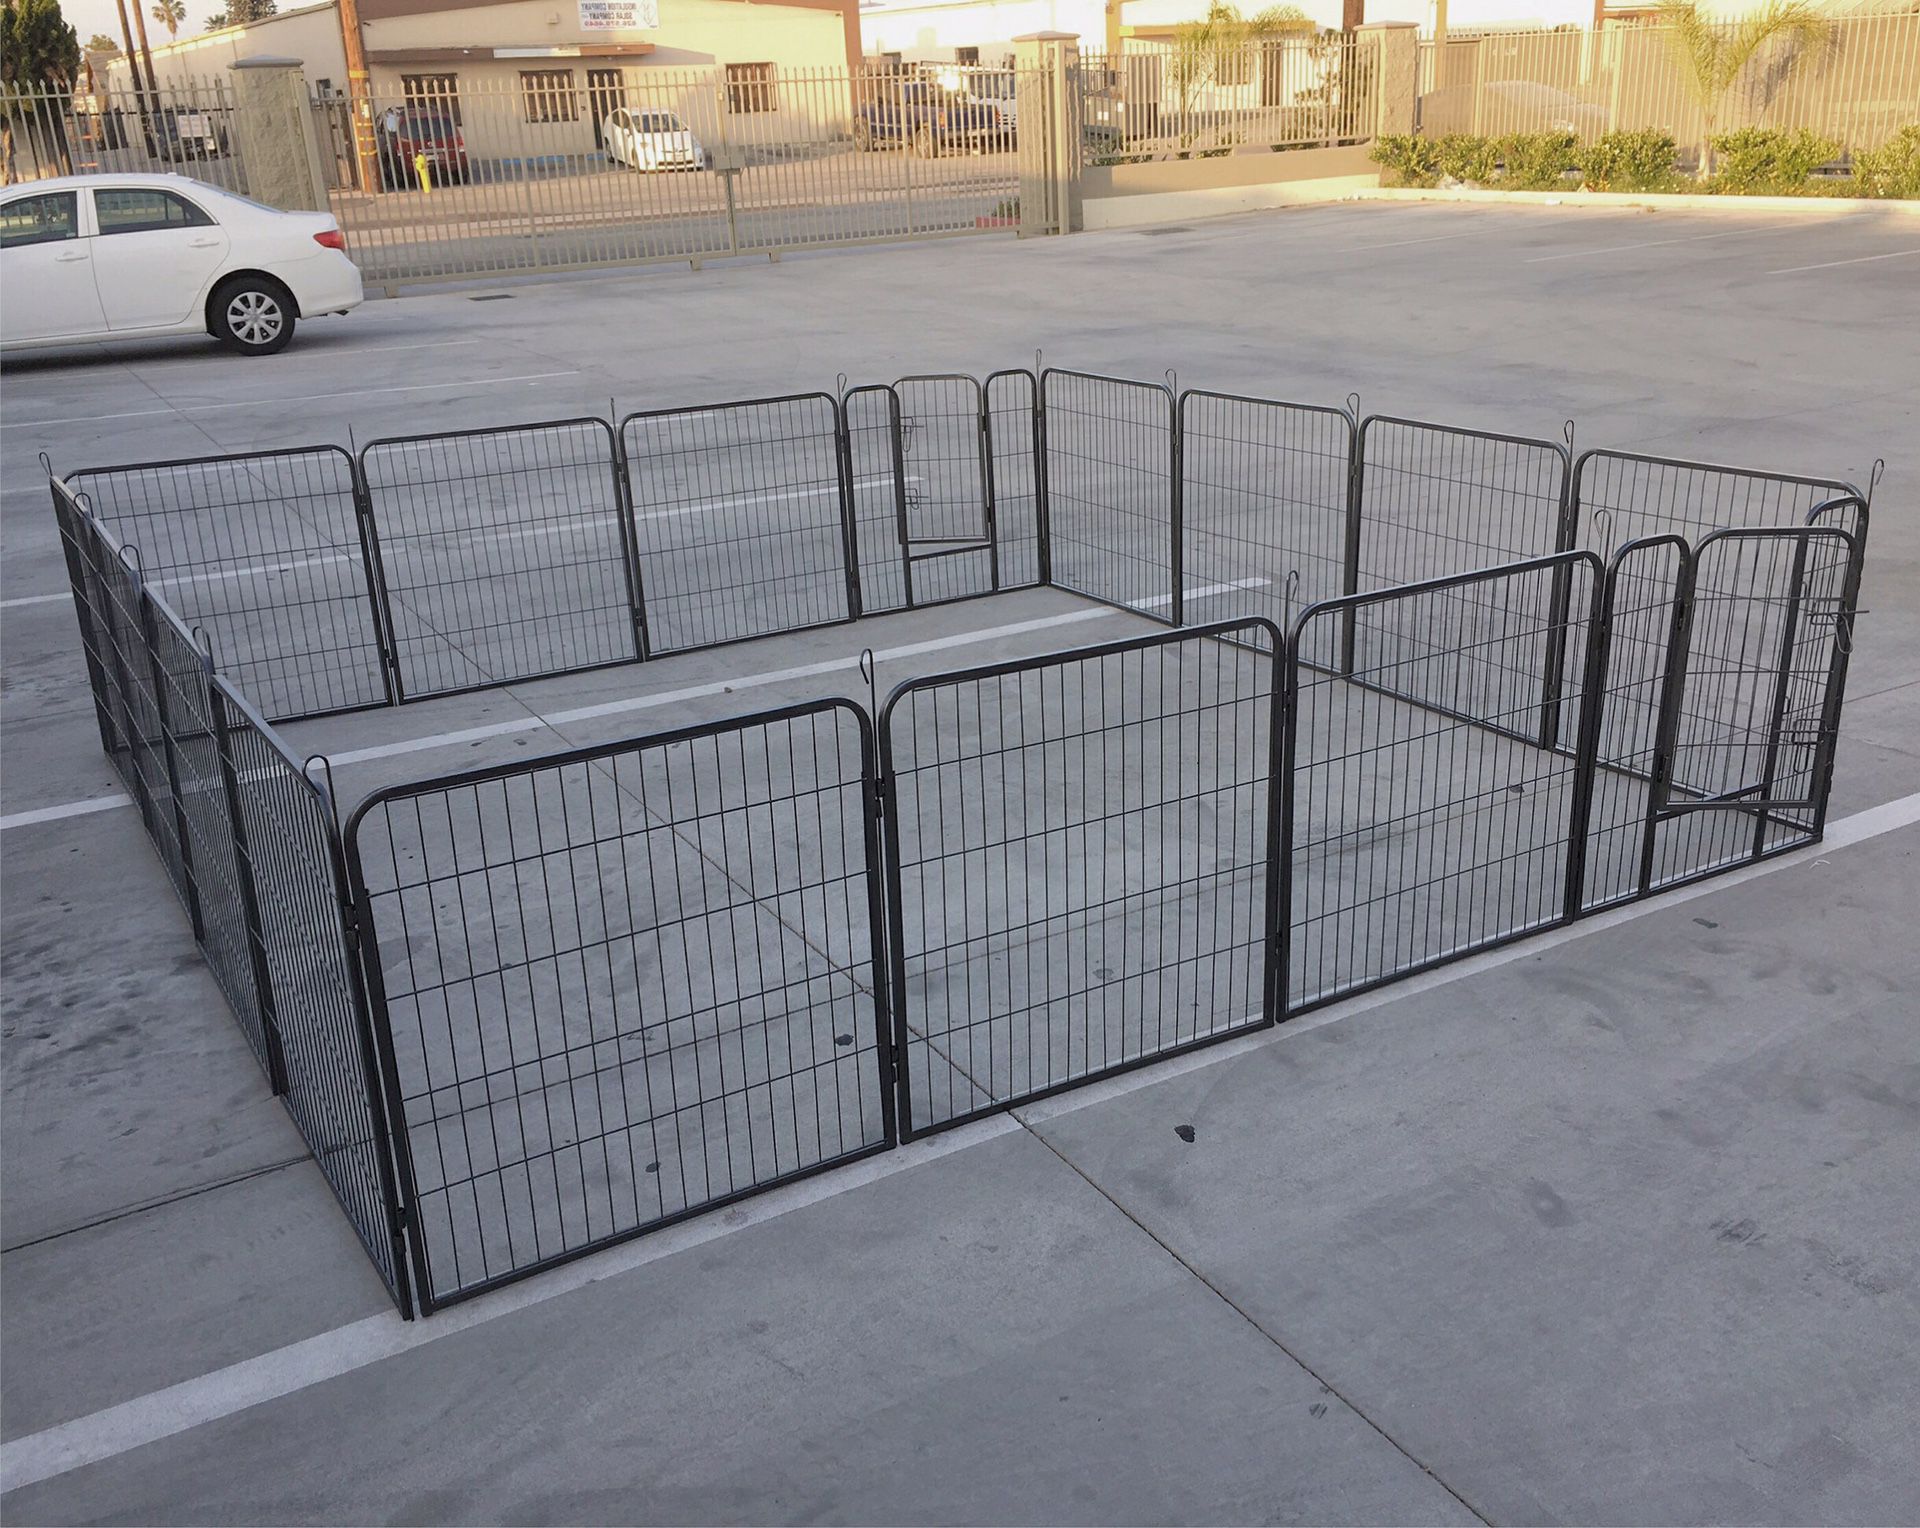 New 32 inch tall x 32 inch wide each panel x 16 panels heavy duty exercise playpen adjustable fence safety gate dog cage crate kennel 